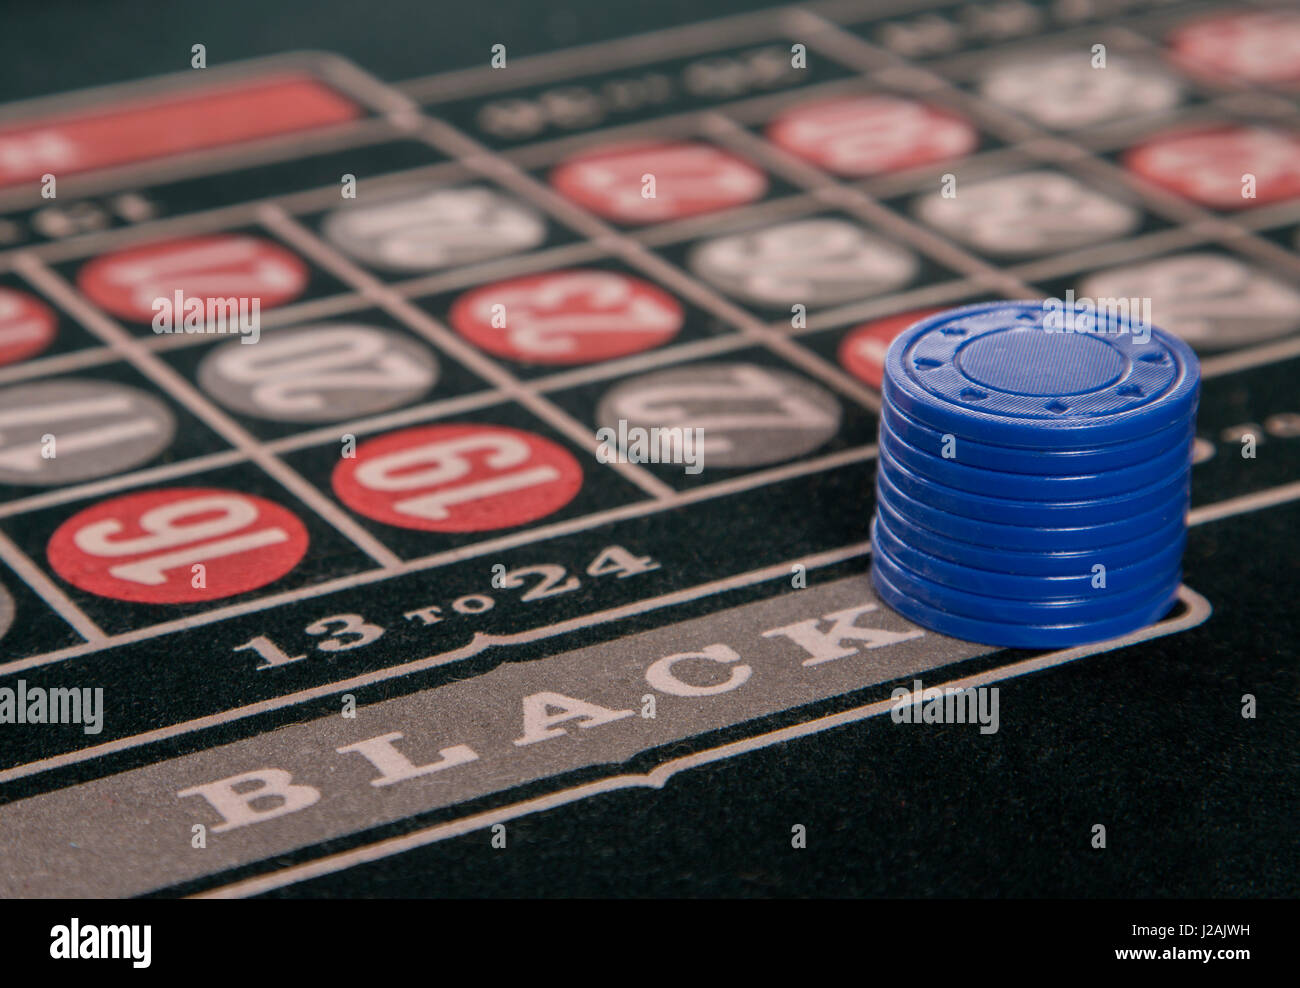 Casino table with roulette and chips Stock Photo - Alamy